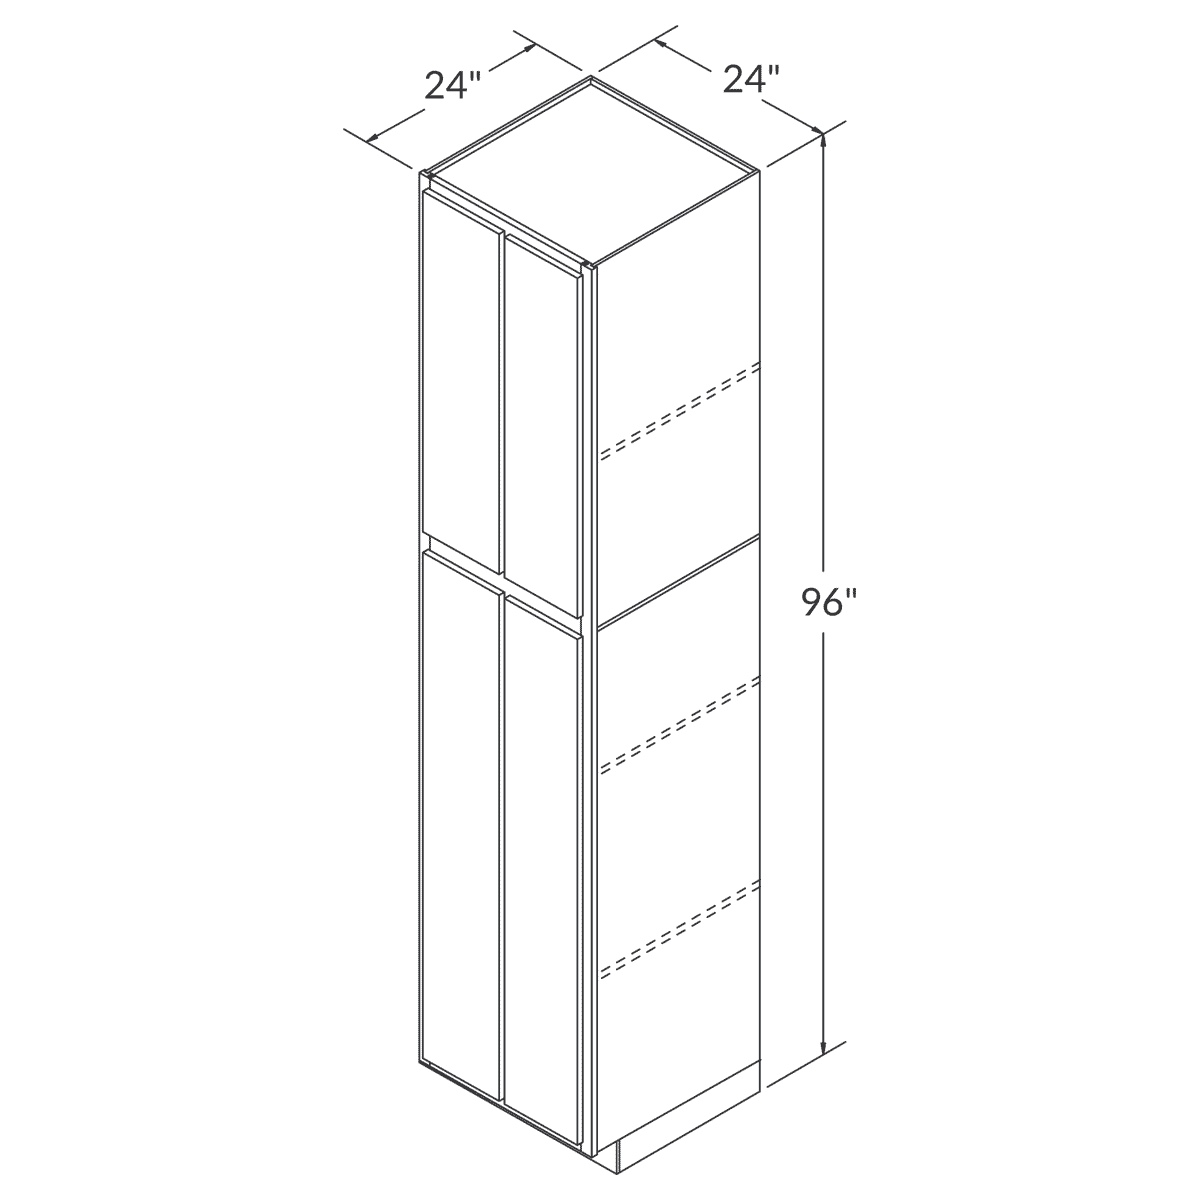 Cubitac Imperial Belmont Cafe Glaze Tall Pantry 24"W x 96"H Assembled Cabinet Wireframe